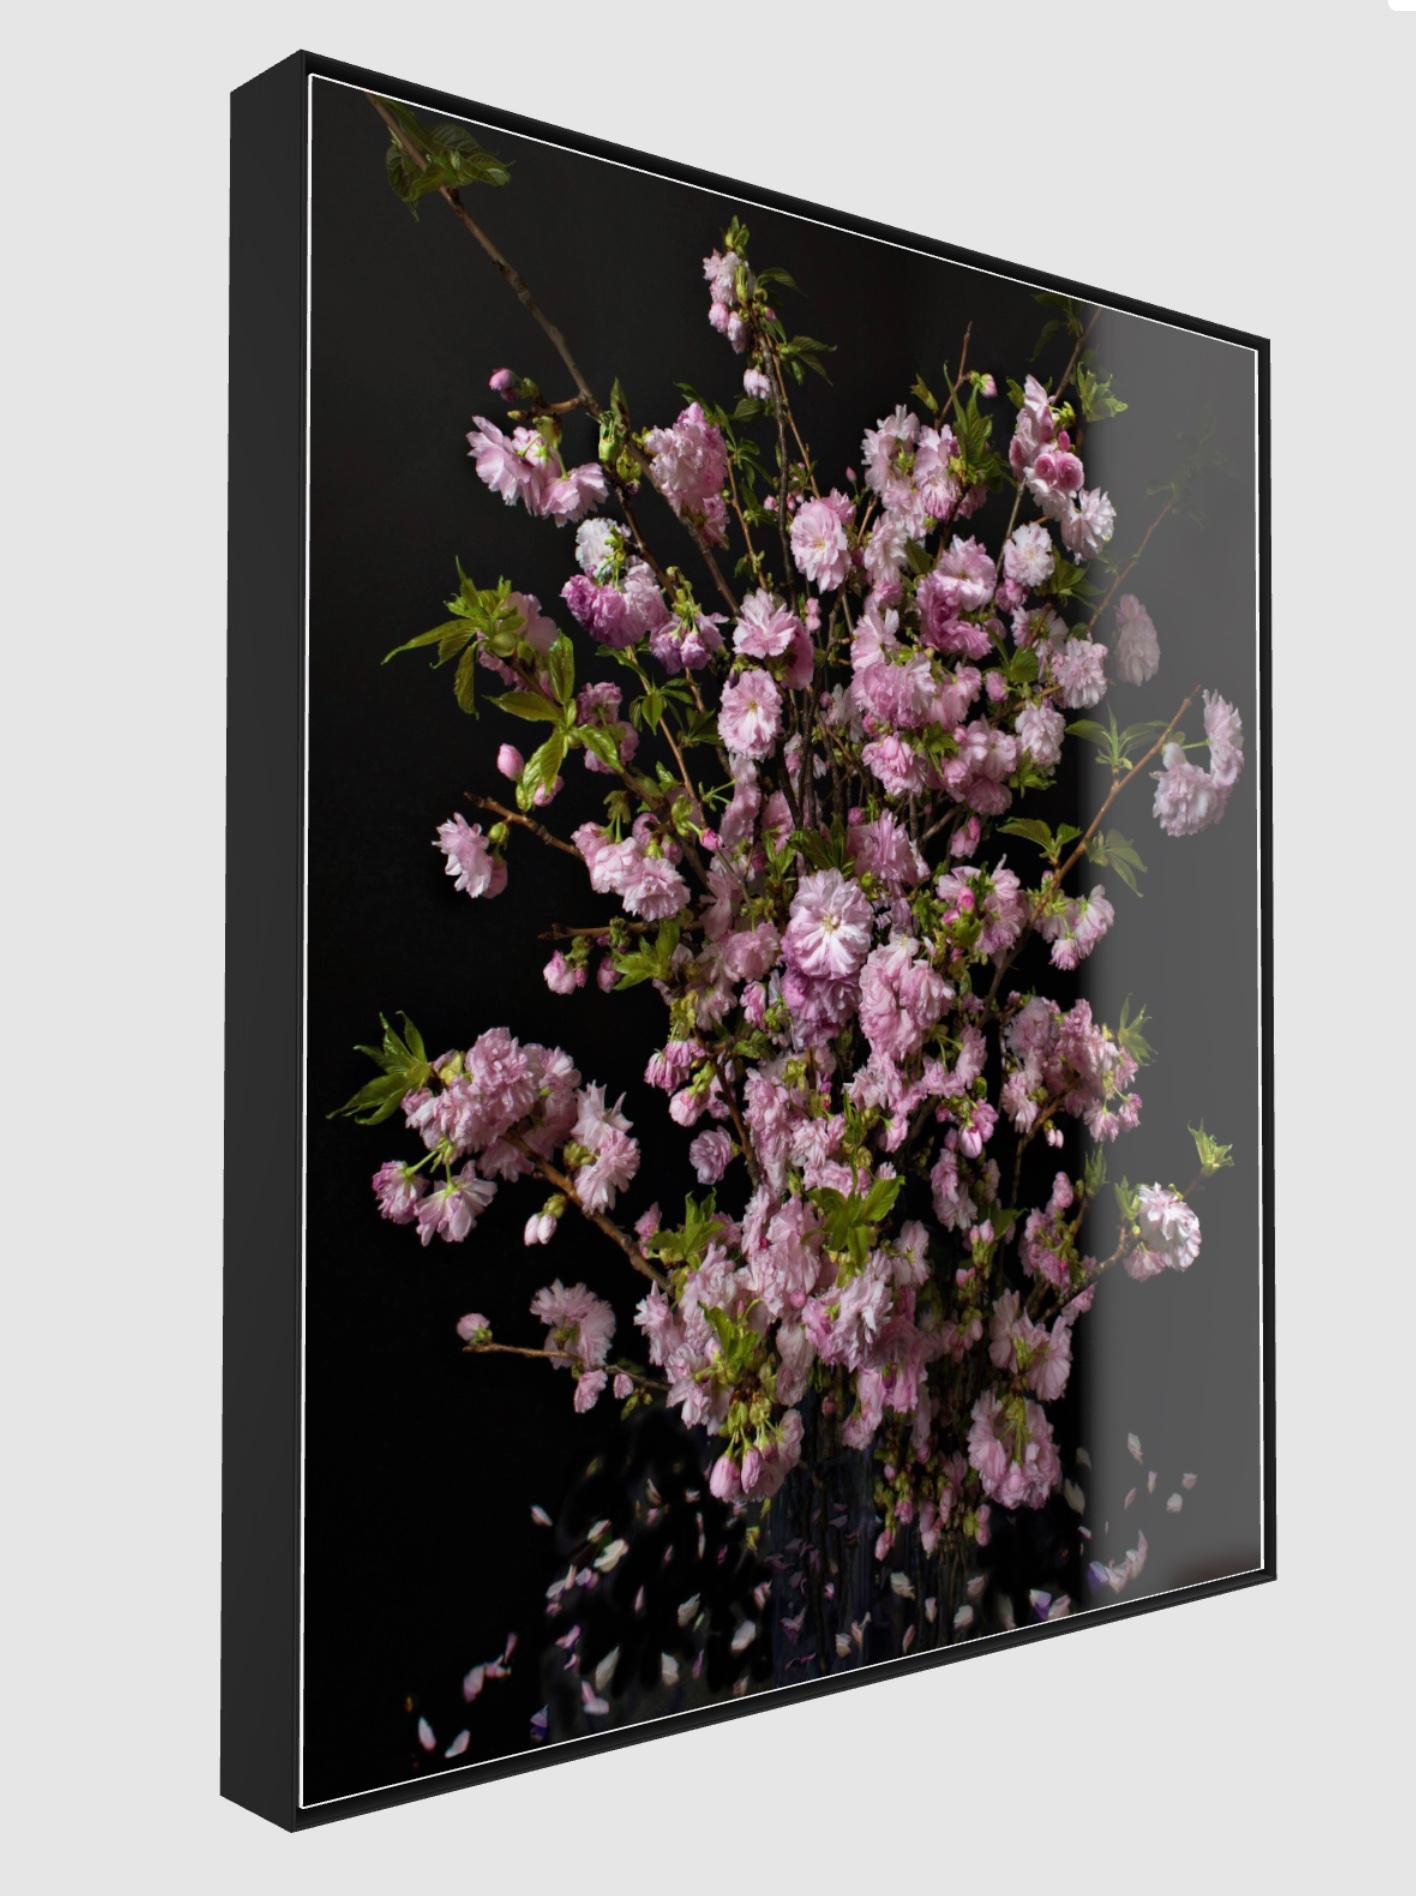 From the Still Alive Series, capturing beauty fading away.
High quality photography with pristine details, large scale.
Mounted under Acrylic Glass for best rendering and protection, with two options : Slimcase  or framed in an 2” deep Aluminum